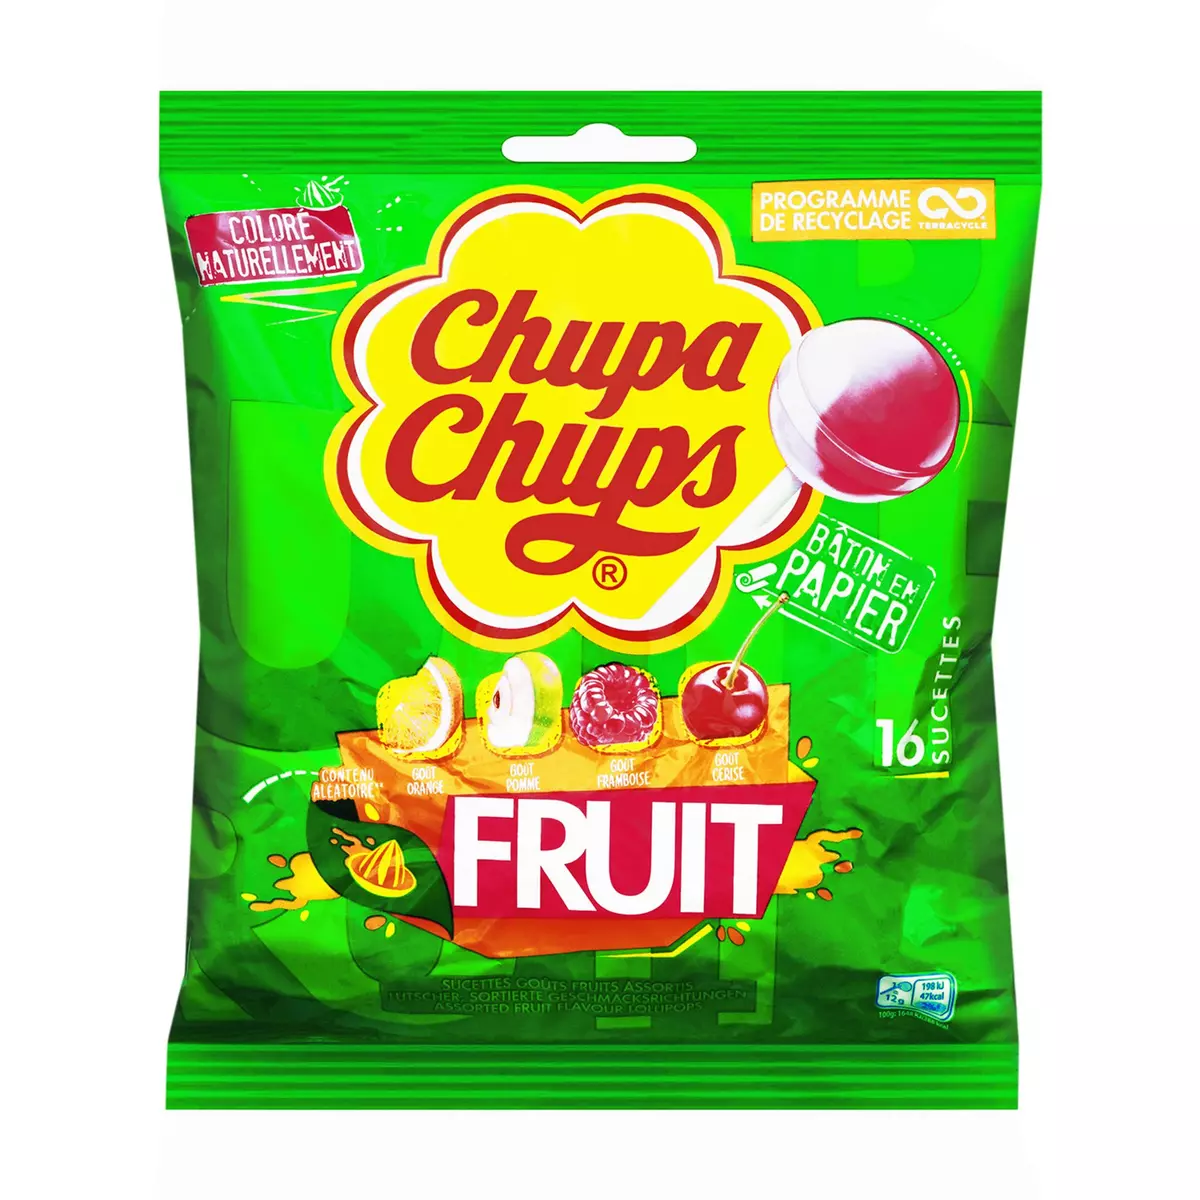 CHUPA CHUPS Sucettes aux fruits 16 sucettes 192g